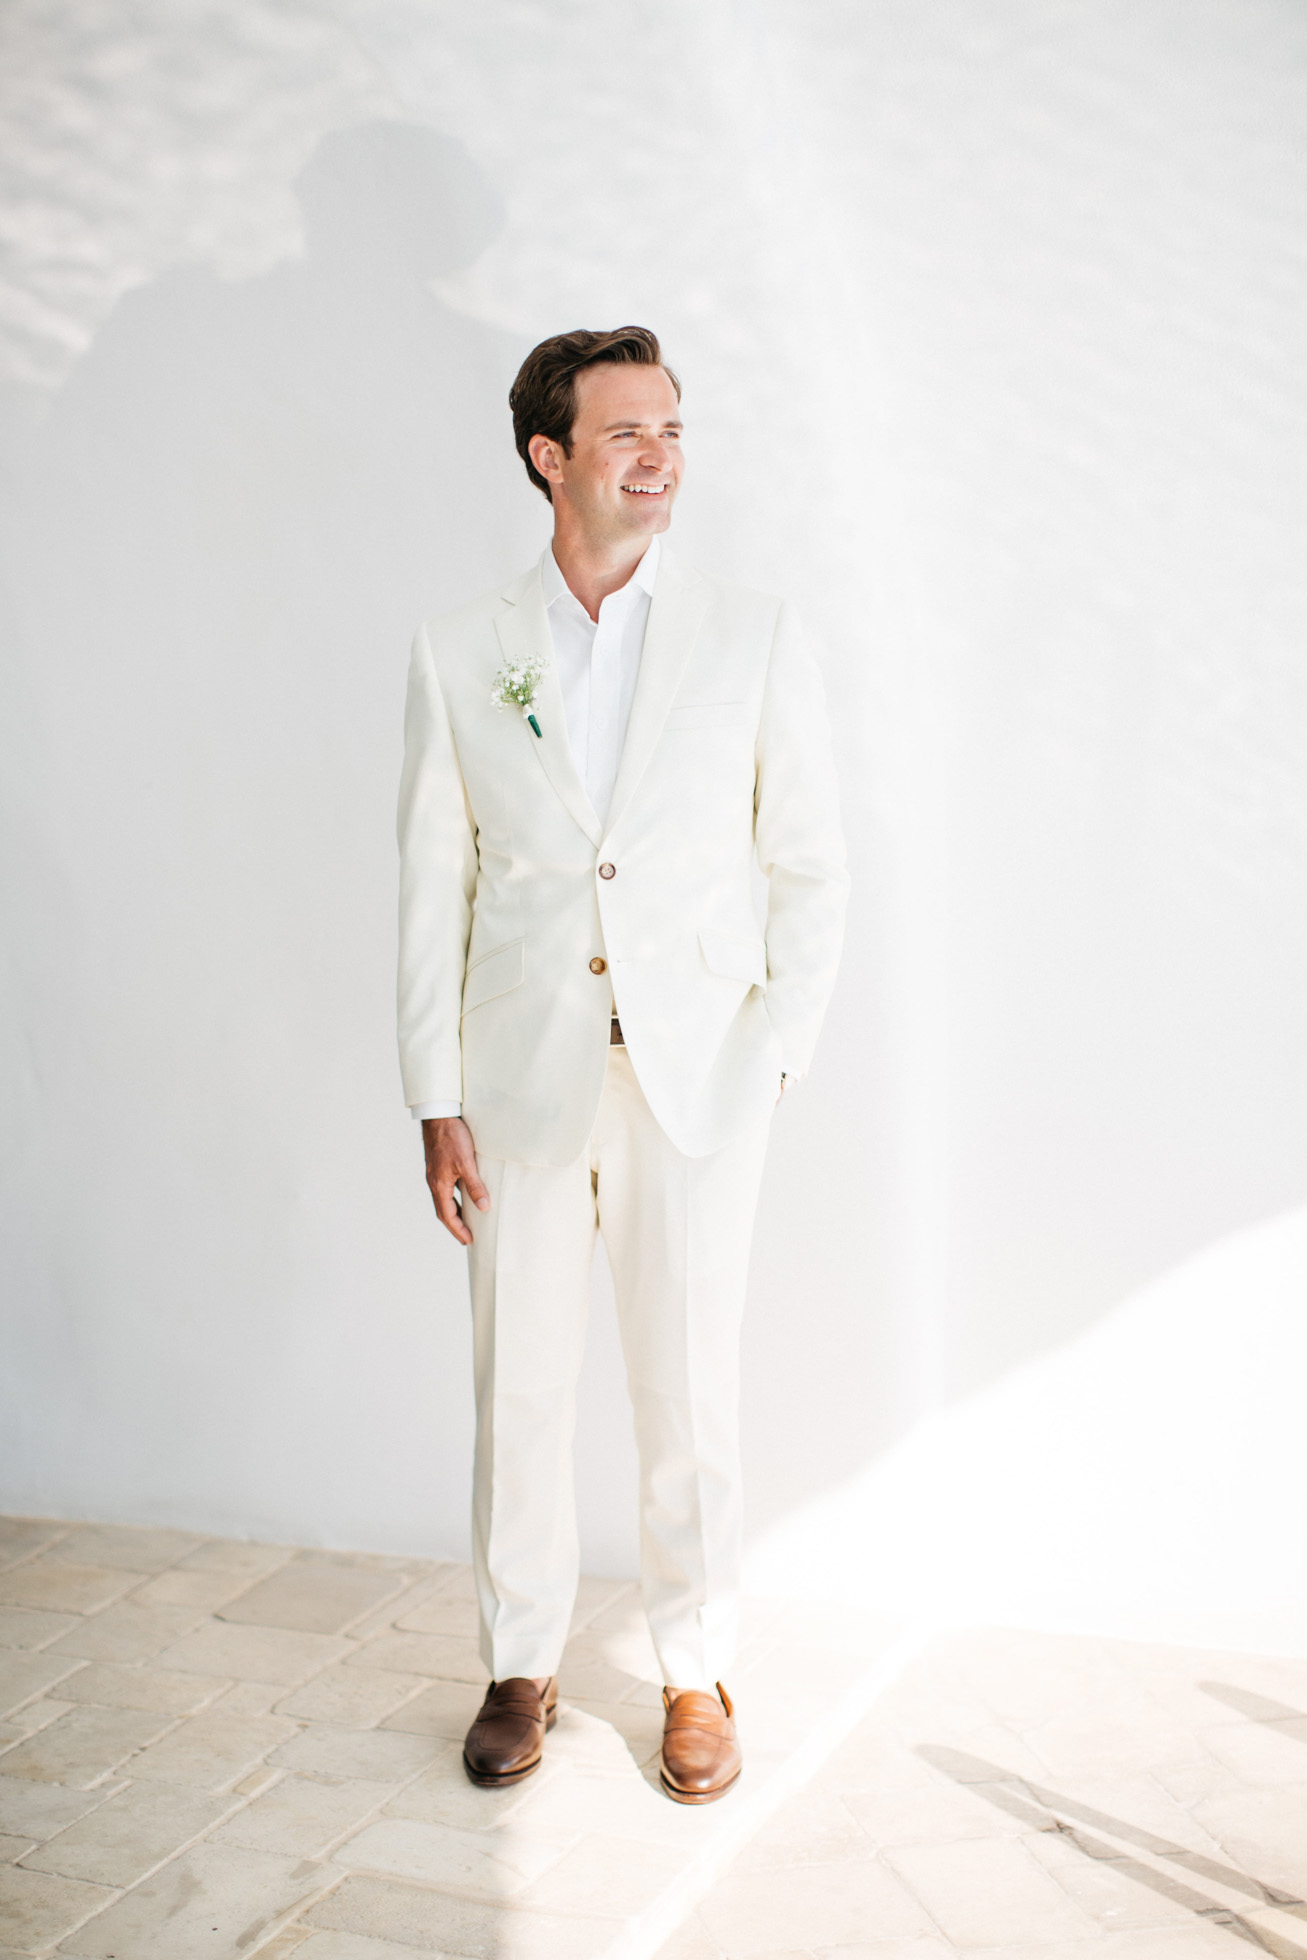 Stylish groom getting married in Canaves Suites Oia Santorini.